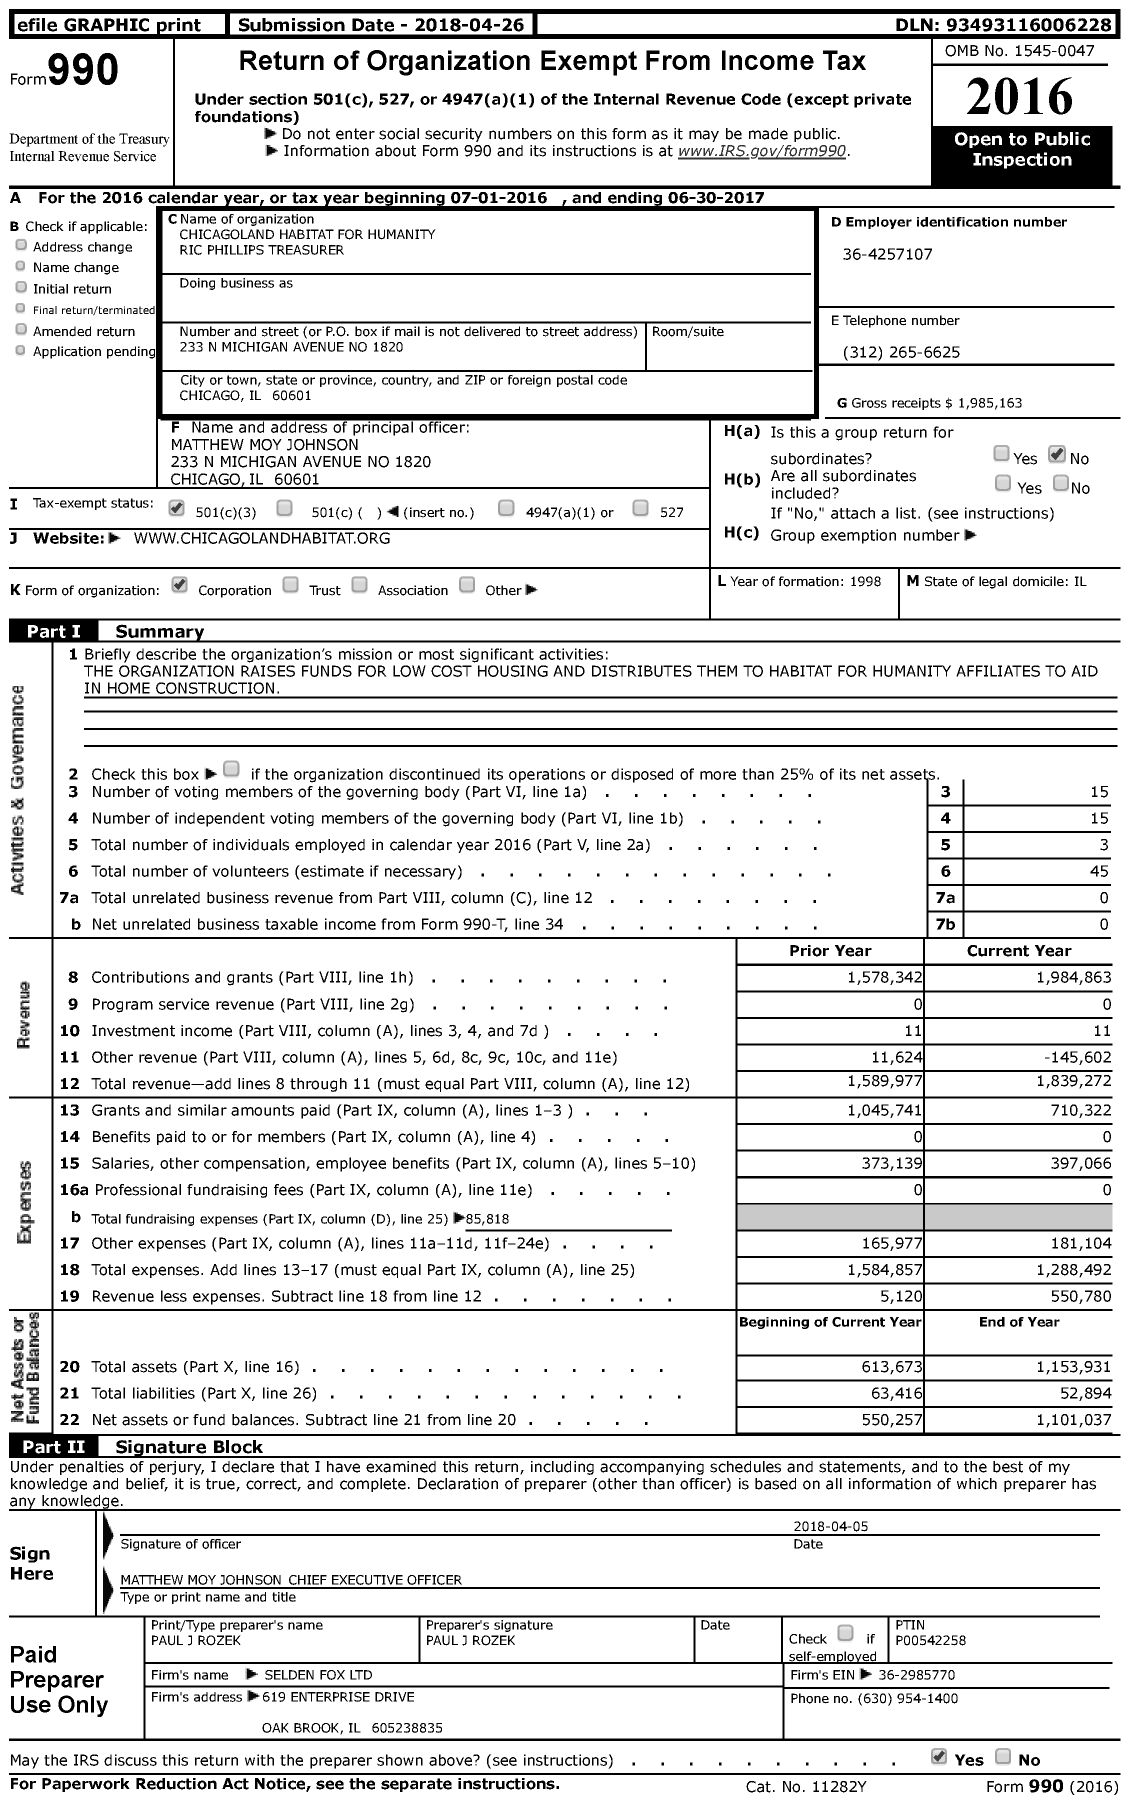 Image of first page of 2016 Form 990 for Chicagoland Habitat for Humanity Ric Phillips Treasurer (CHFH)